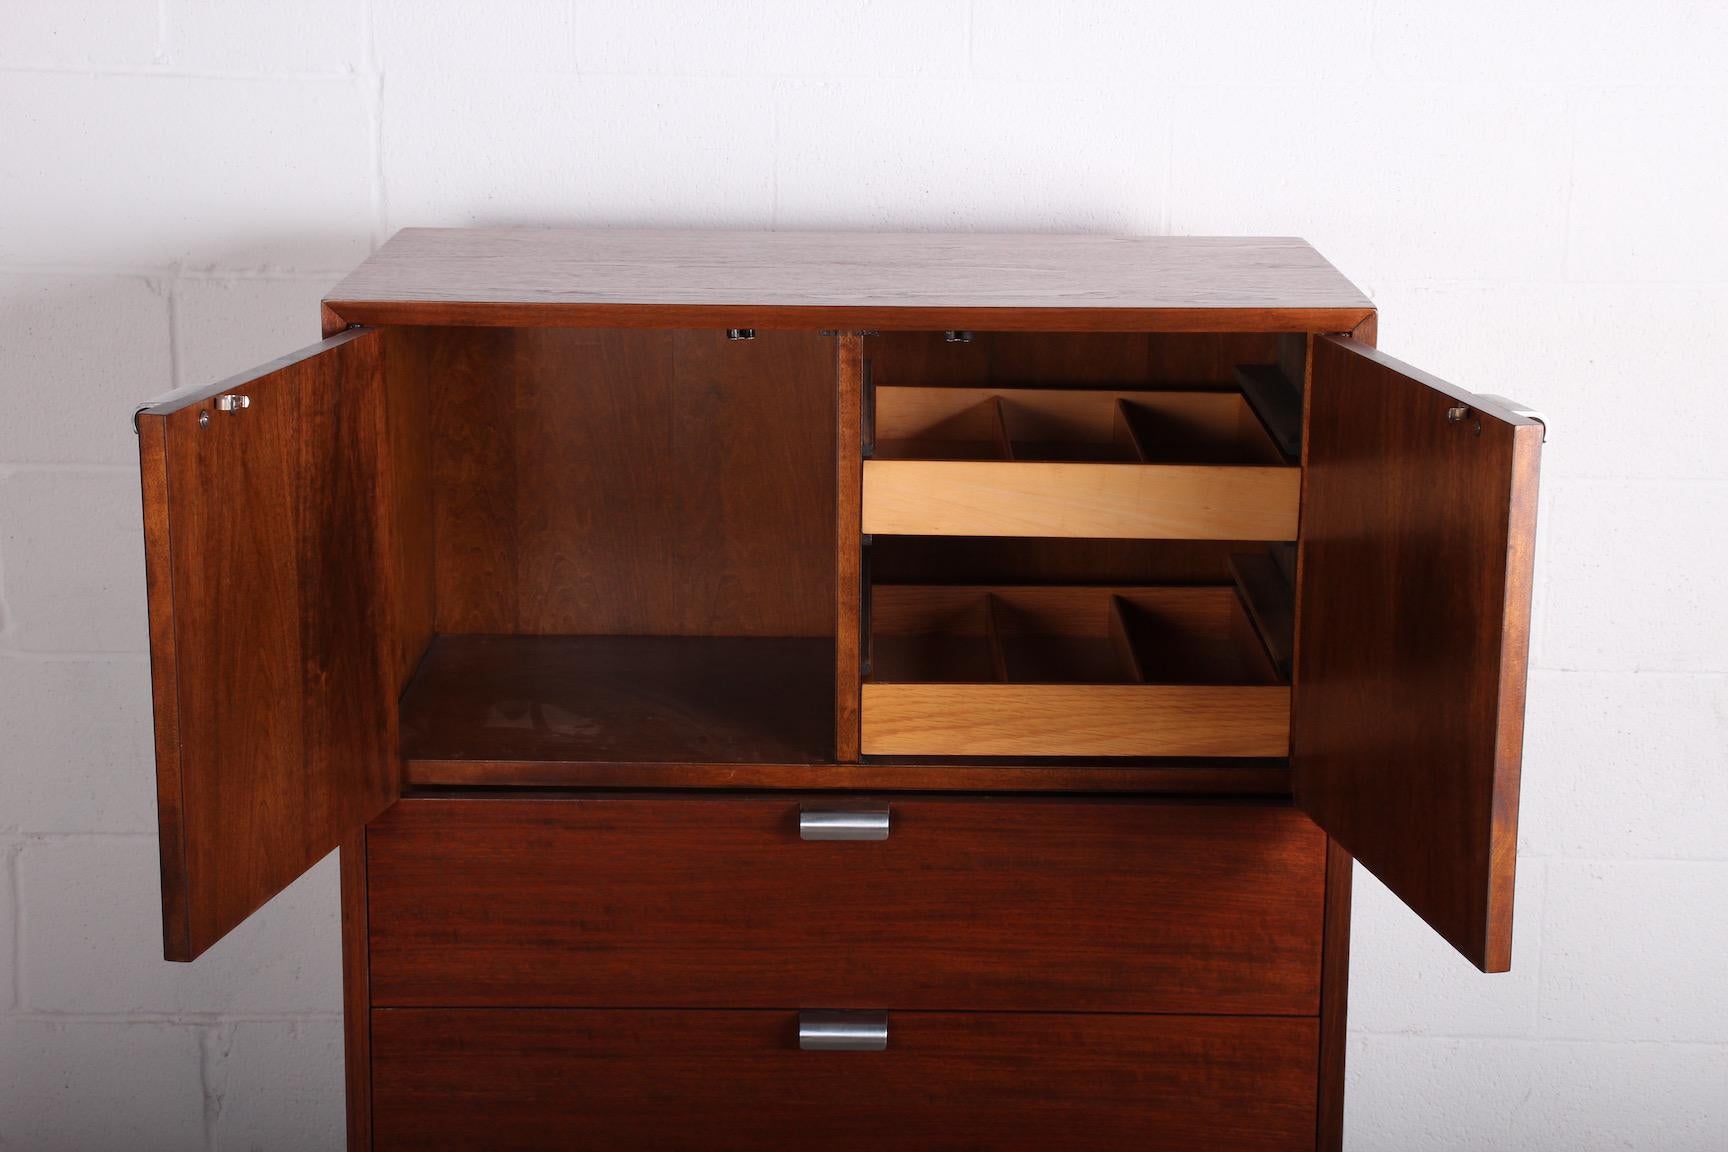 A walnut chest of drawers with aluminum pulls. Designed by George Nelson for Herman Miller.